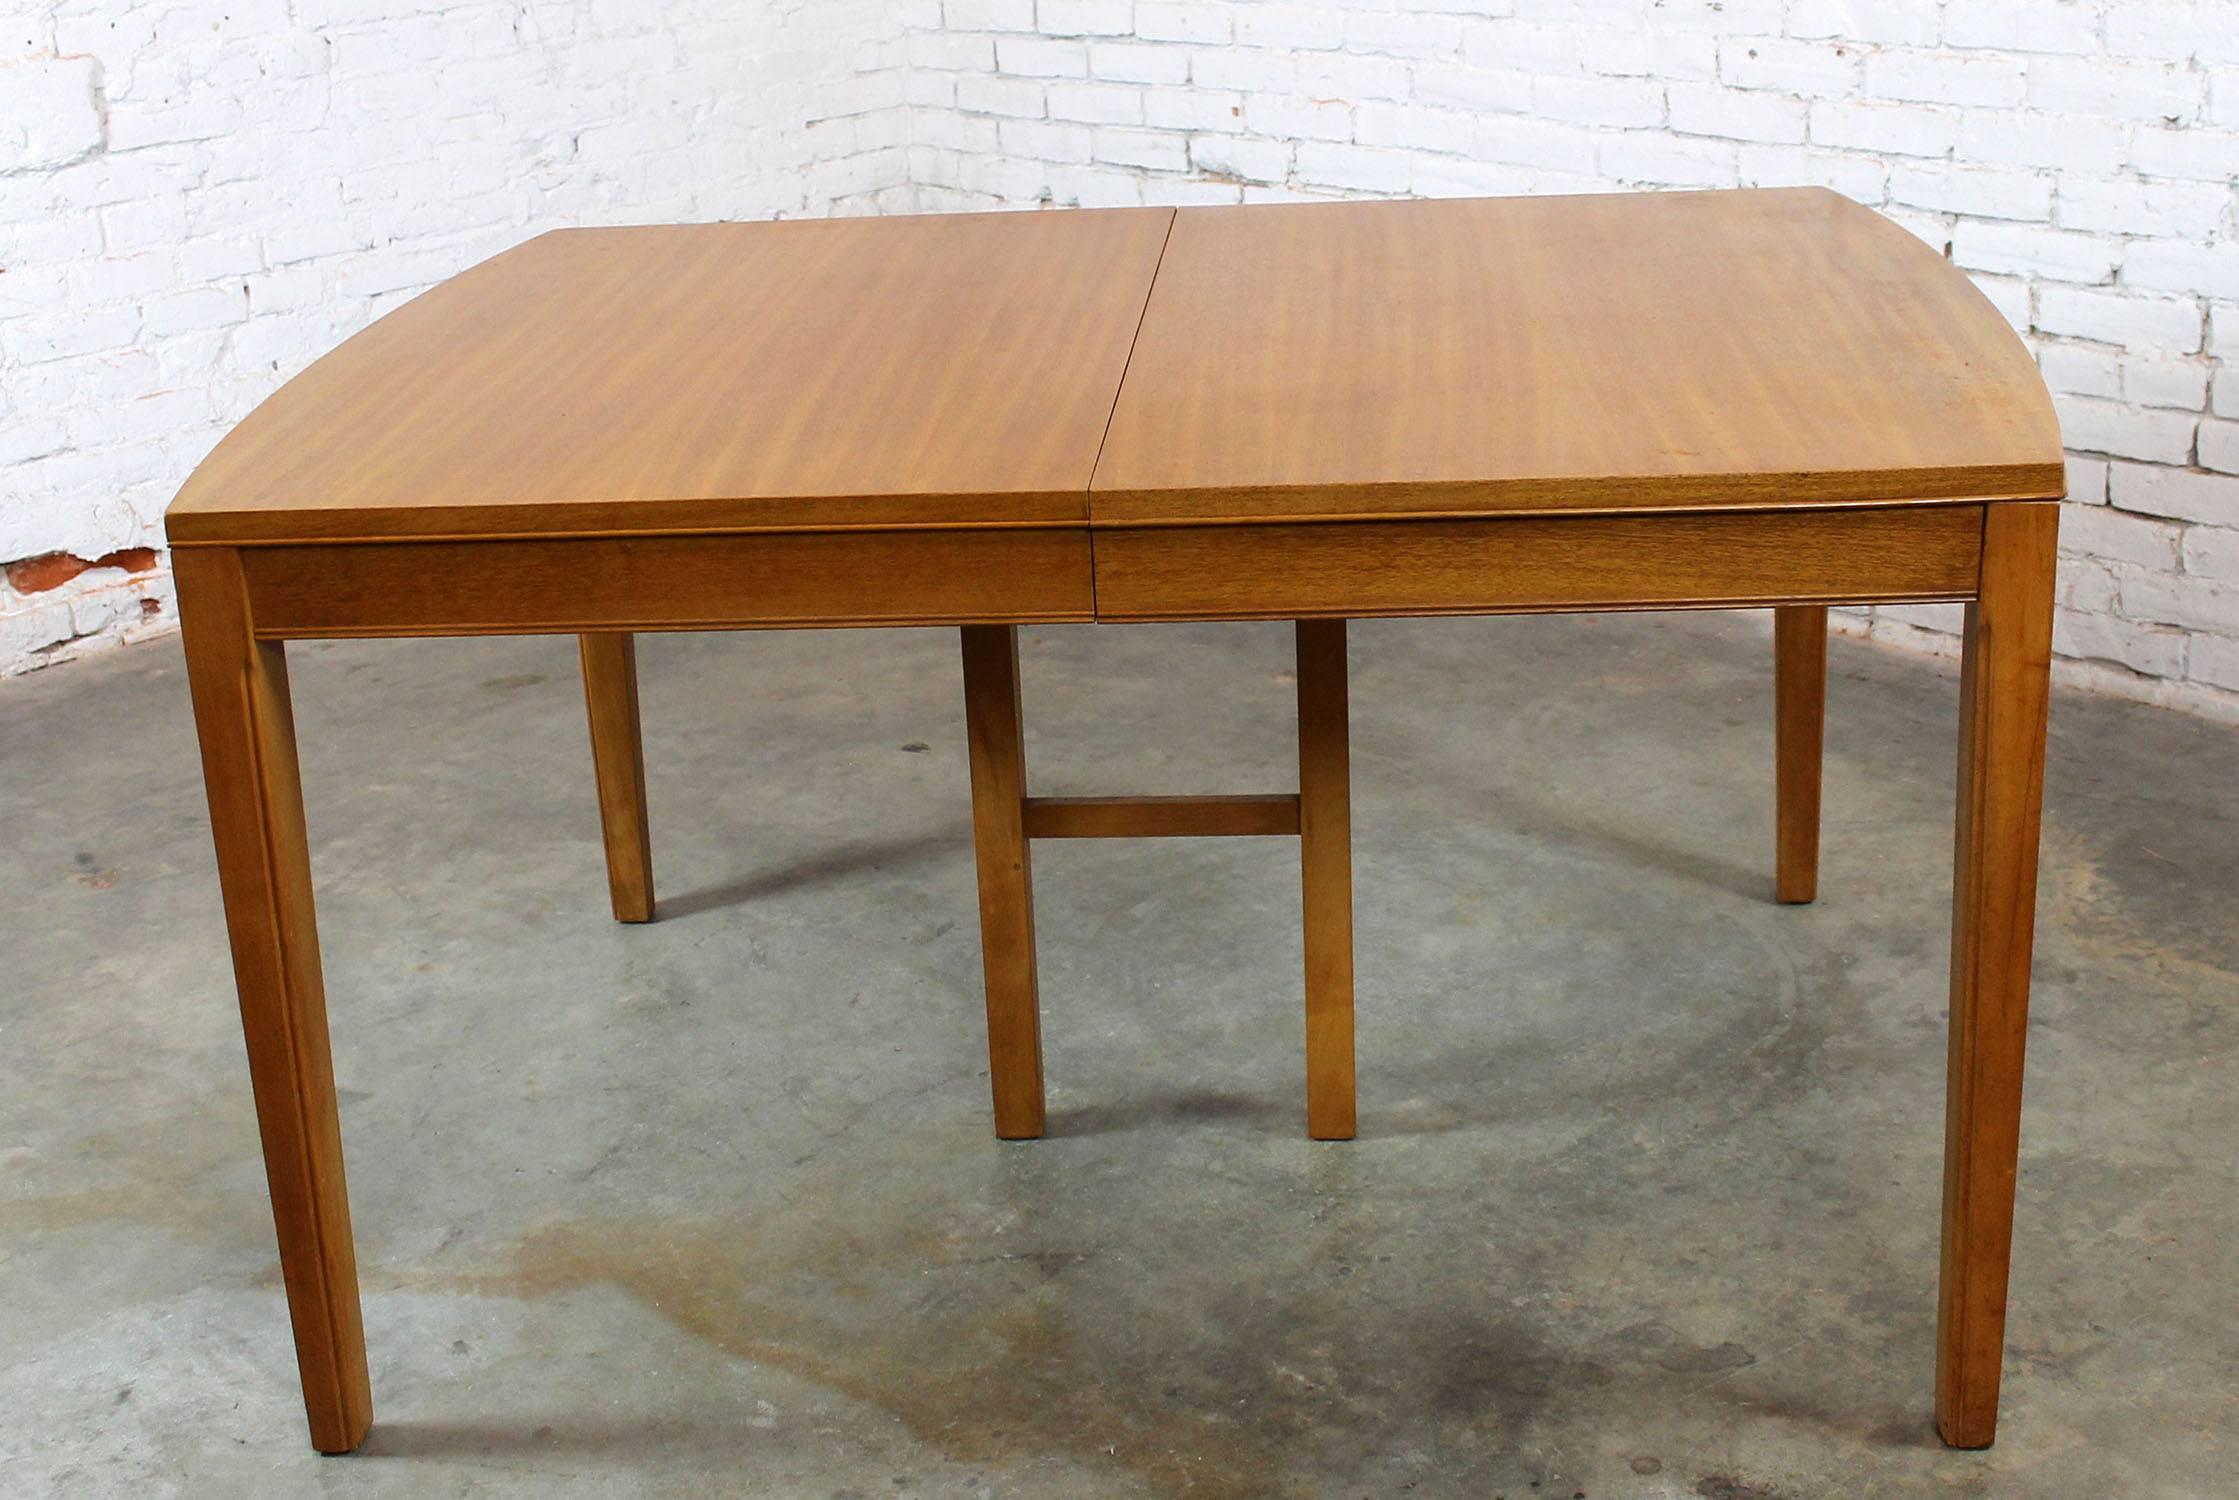 This vintage Mid-Century Modern dining table is so handsome with its bowed ends and beautiful mahogany veneer plus it is in very good age appropriate condition. The maker is undetermined but its great quality and good lines are not.

This is a